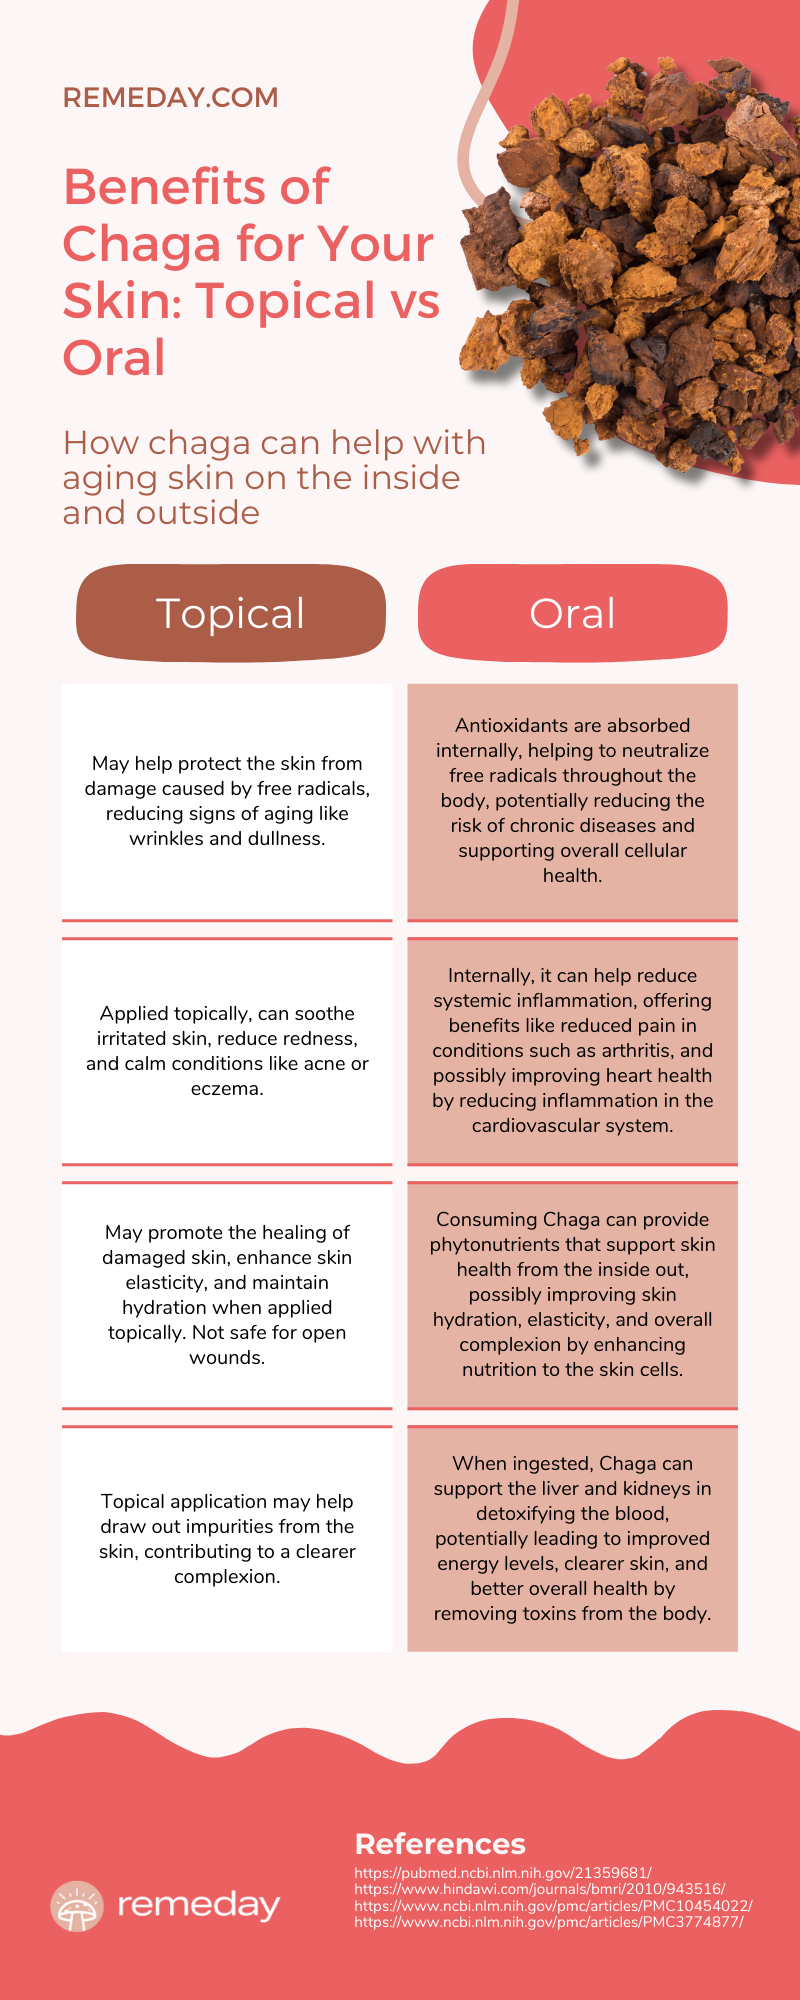 Chaga benefits for skin infographic topical vs oral